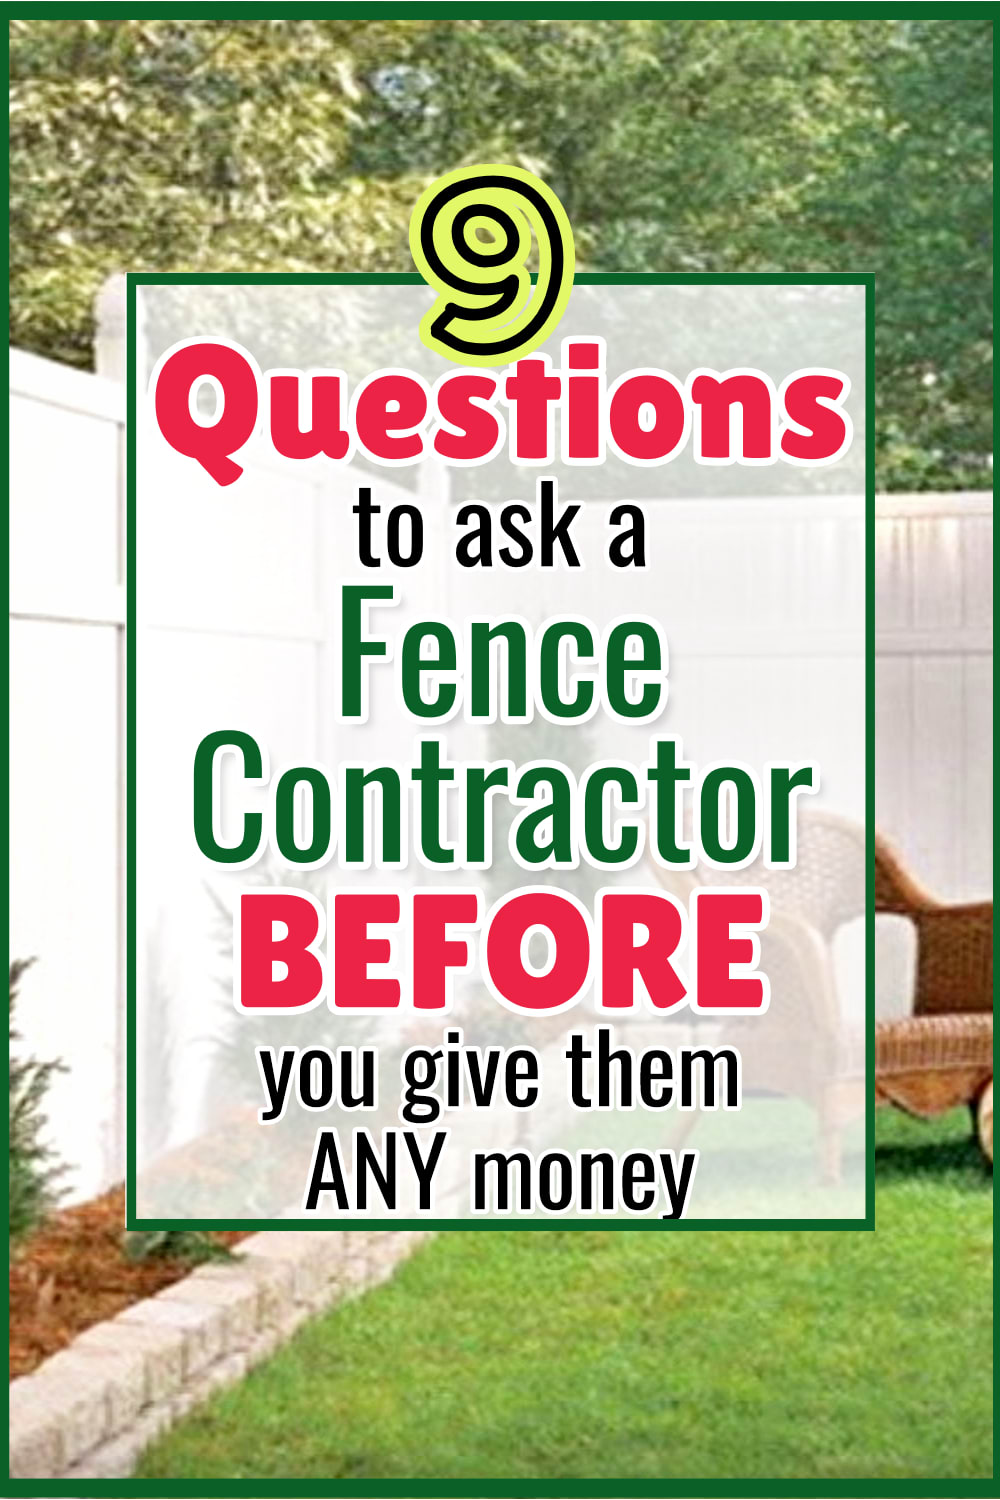 questions to ask fence contractor and how to find a GOOD fence contractor to build and install fence in your backyard.  These are IMPORTANT questions for a fencing contractor when you decide to get estimates for fence installation - how to save money on home renovations and improvements when fencing in backyard - backyard fences on a budget - easy DIY fence ideas and contractor tips - backyard fence ideas for dogs - cost to fence backyard and build fence panels and gates - how to build a fence on a budget